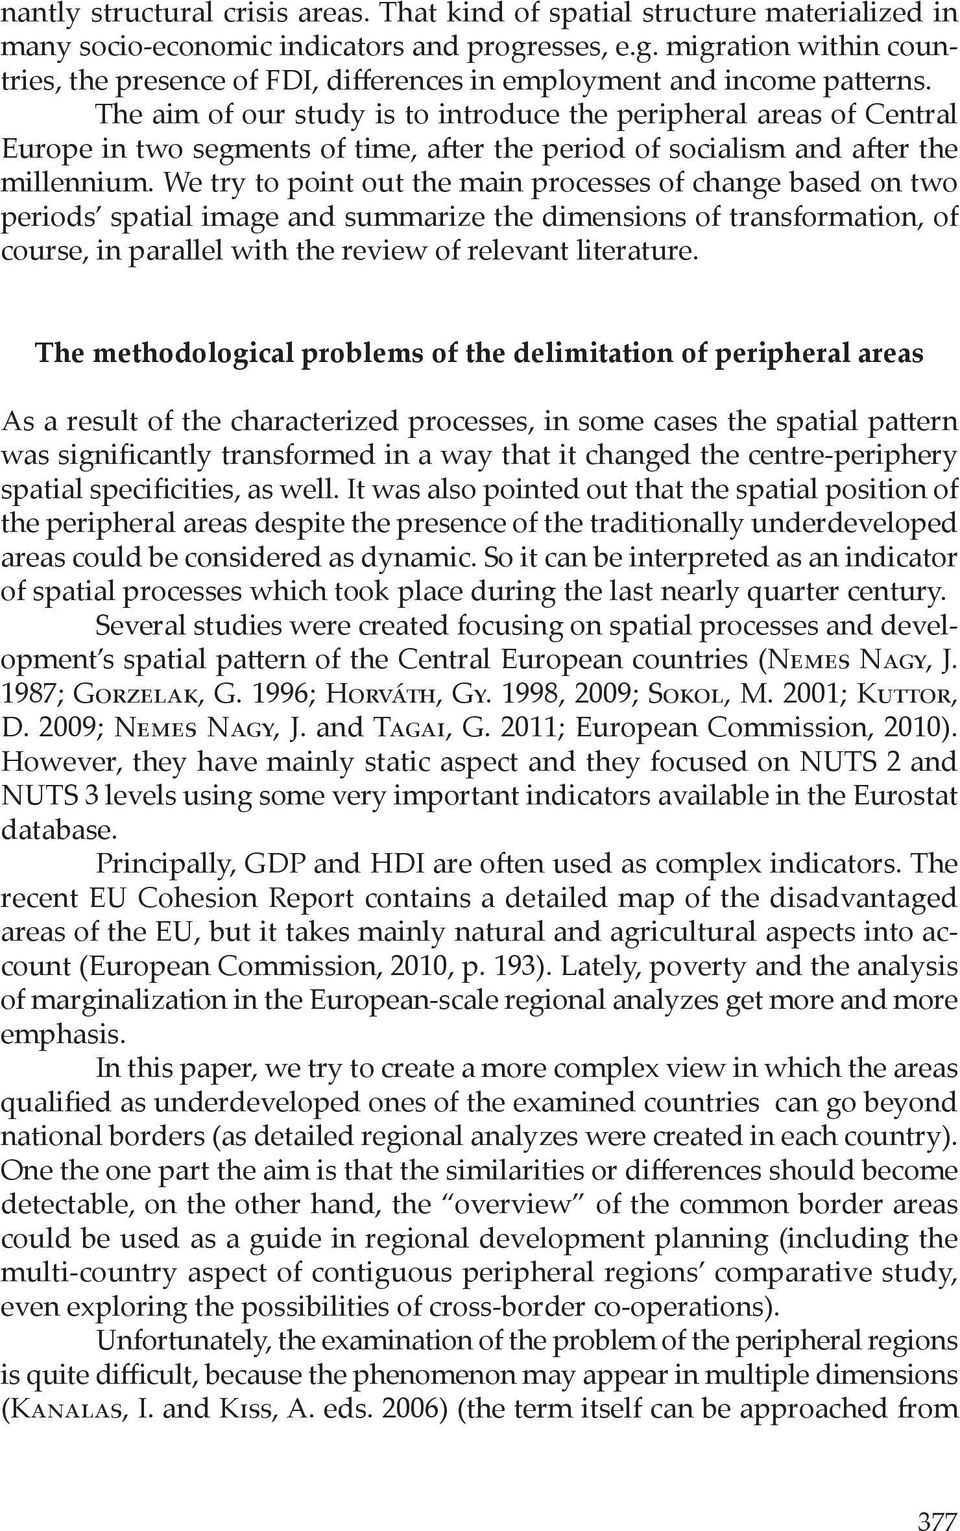 The aim of our study is to introduce the peripheral areas of Central Europe in two segments of time, after the period of socialism and after the millennium.